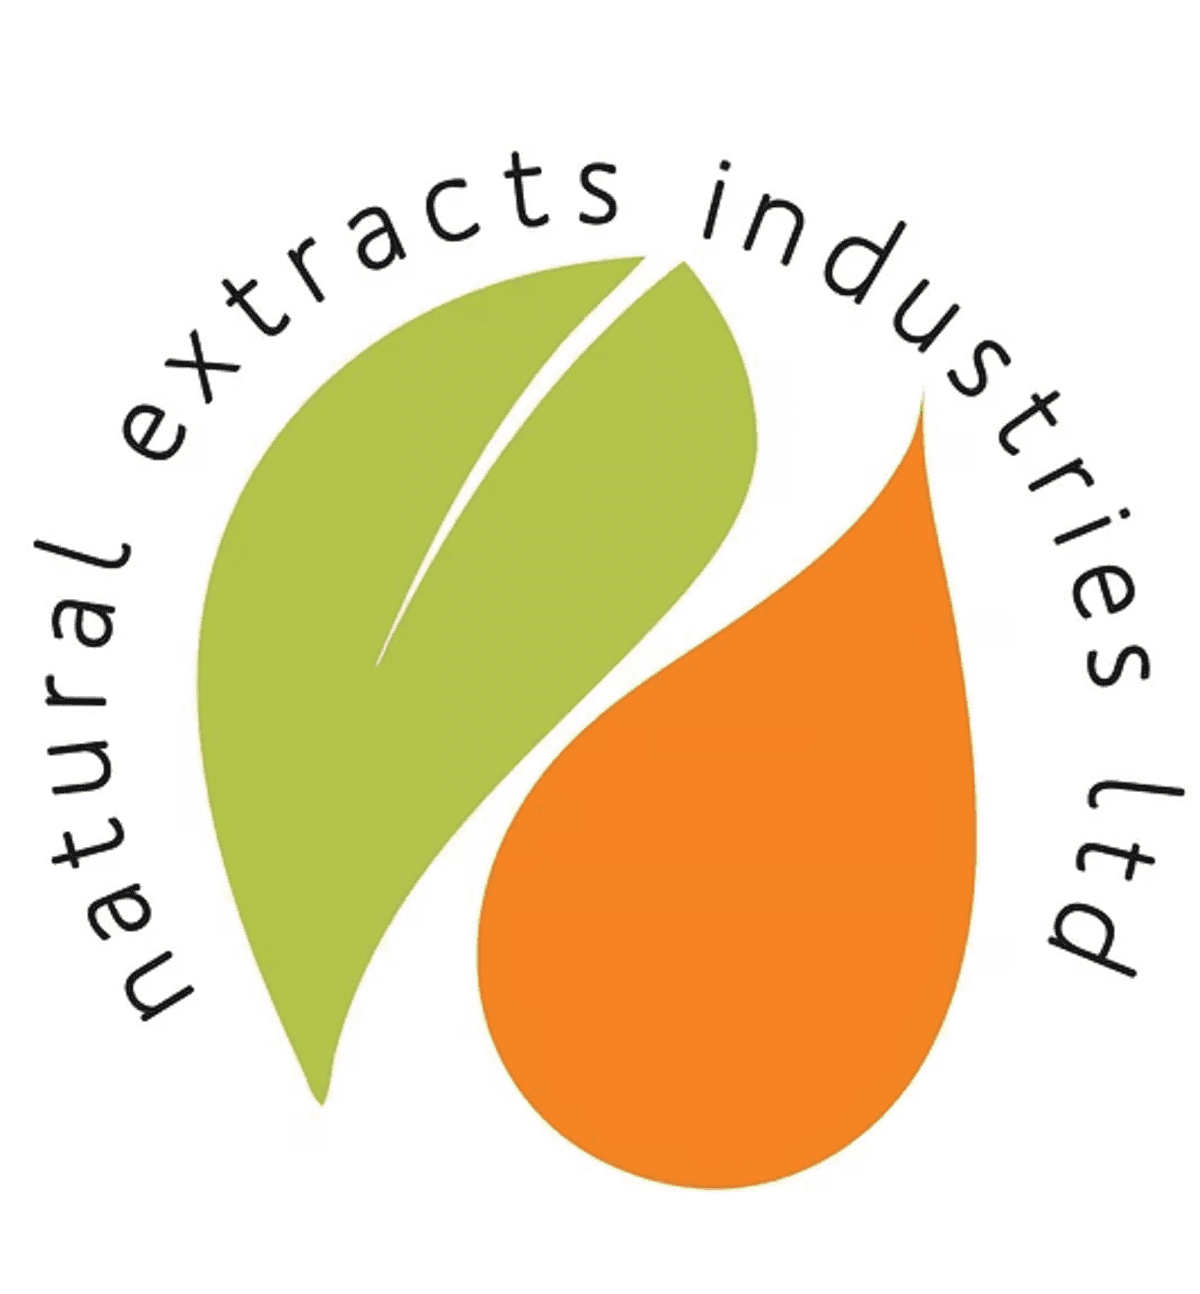 New Jobs at Natural Extracts Industries (NEI), Nafasi za kazi Natural Extracts Industries (NEI), natural extracts industries ltd, natural extracts industries ltd jobs